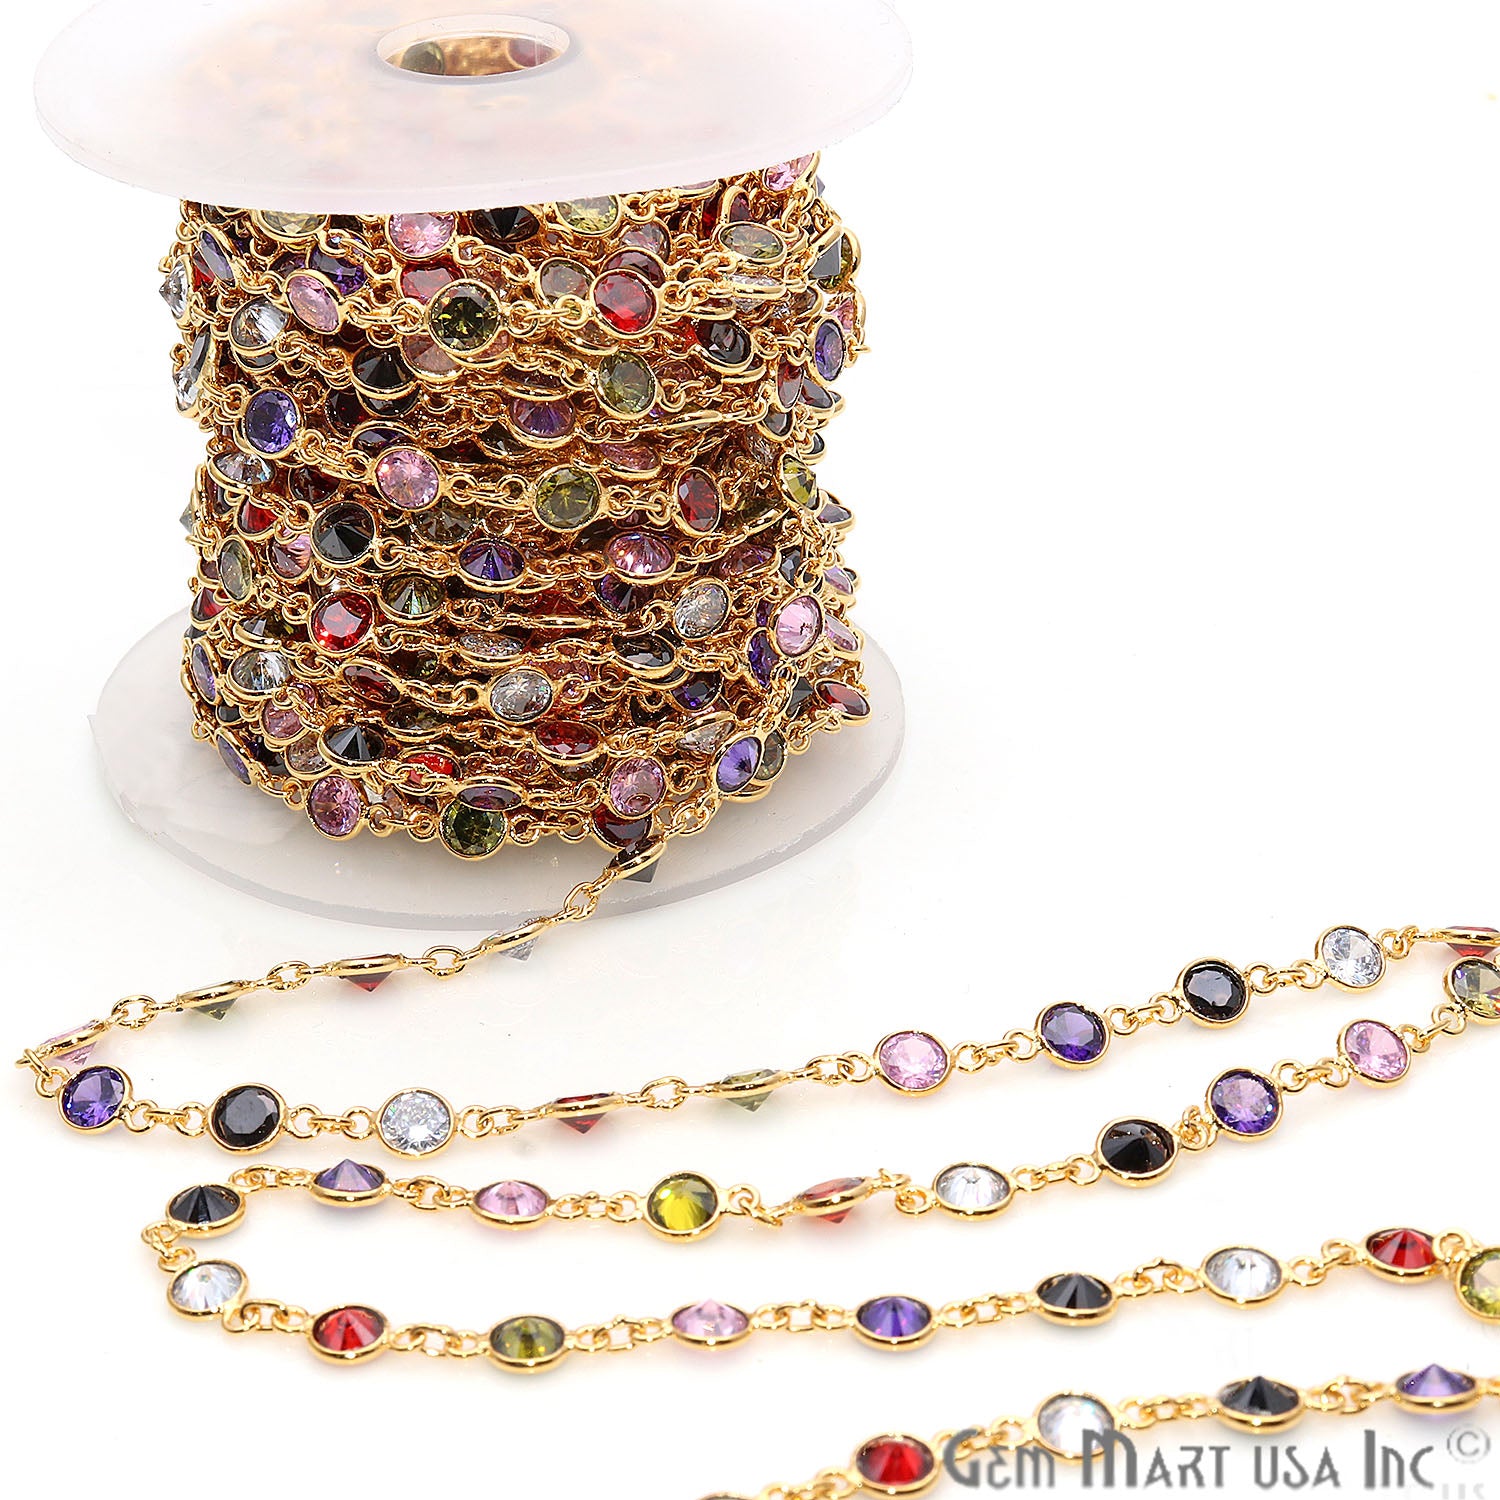 Multi Stone 5mm Round Bezeled Gold Plated Continuous Connector Chain - GemMartUSA